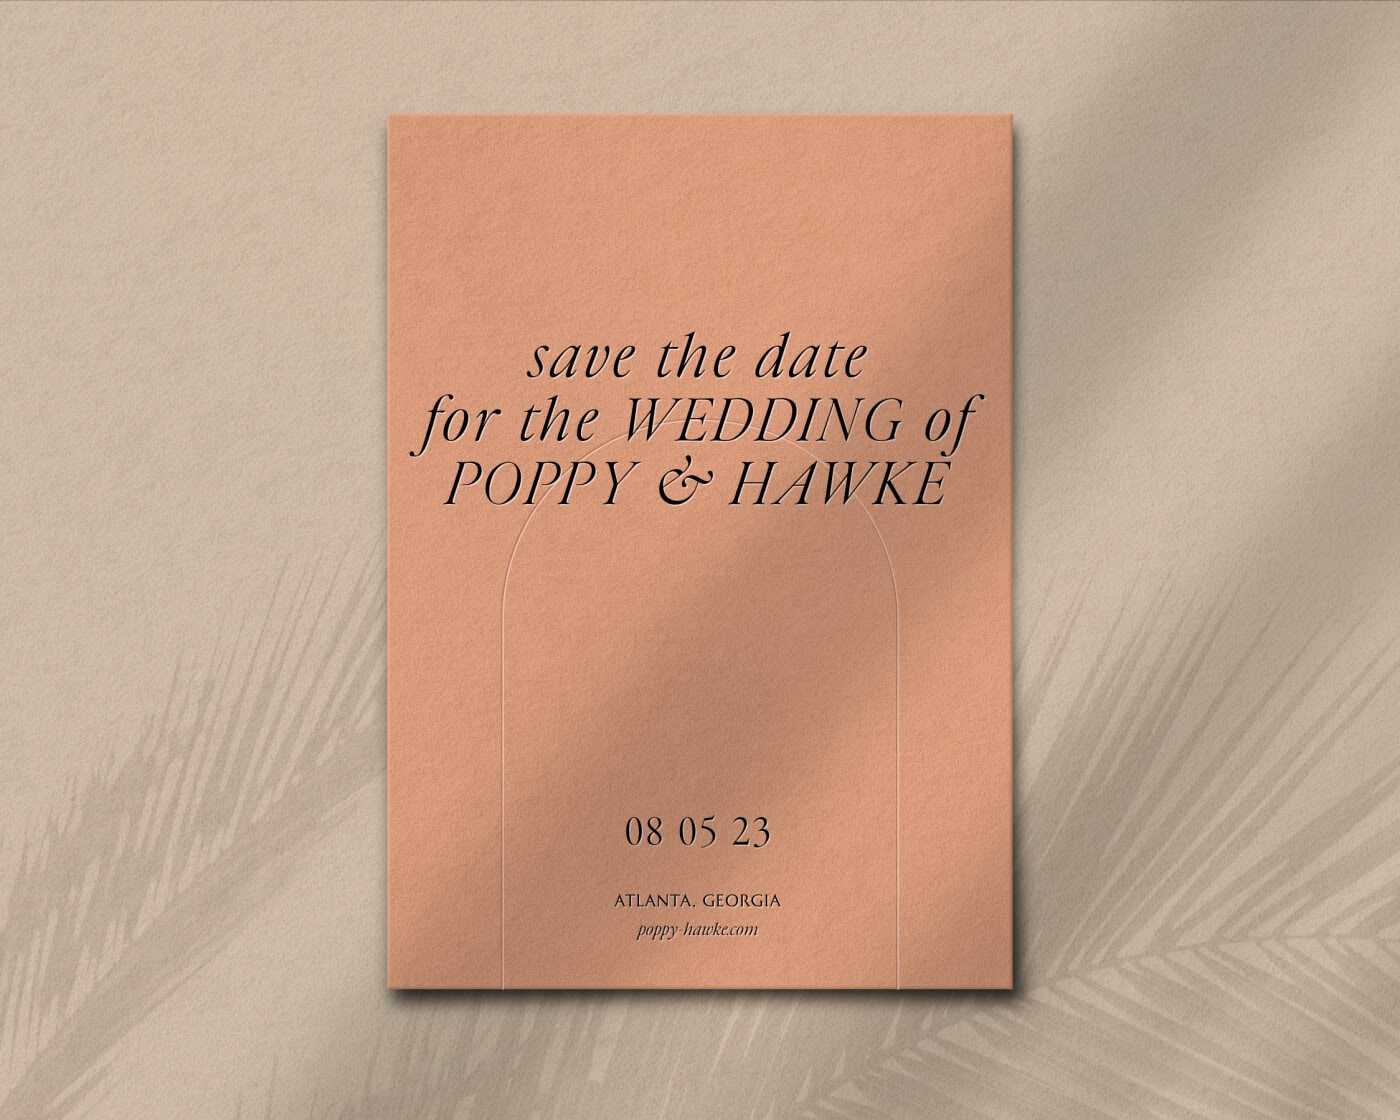 The Dos and Don'ts of Save the Date Etiquette - Mindy Weiss